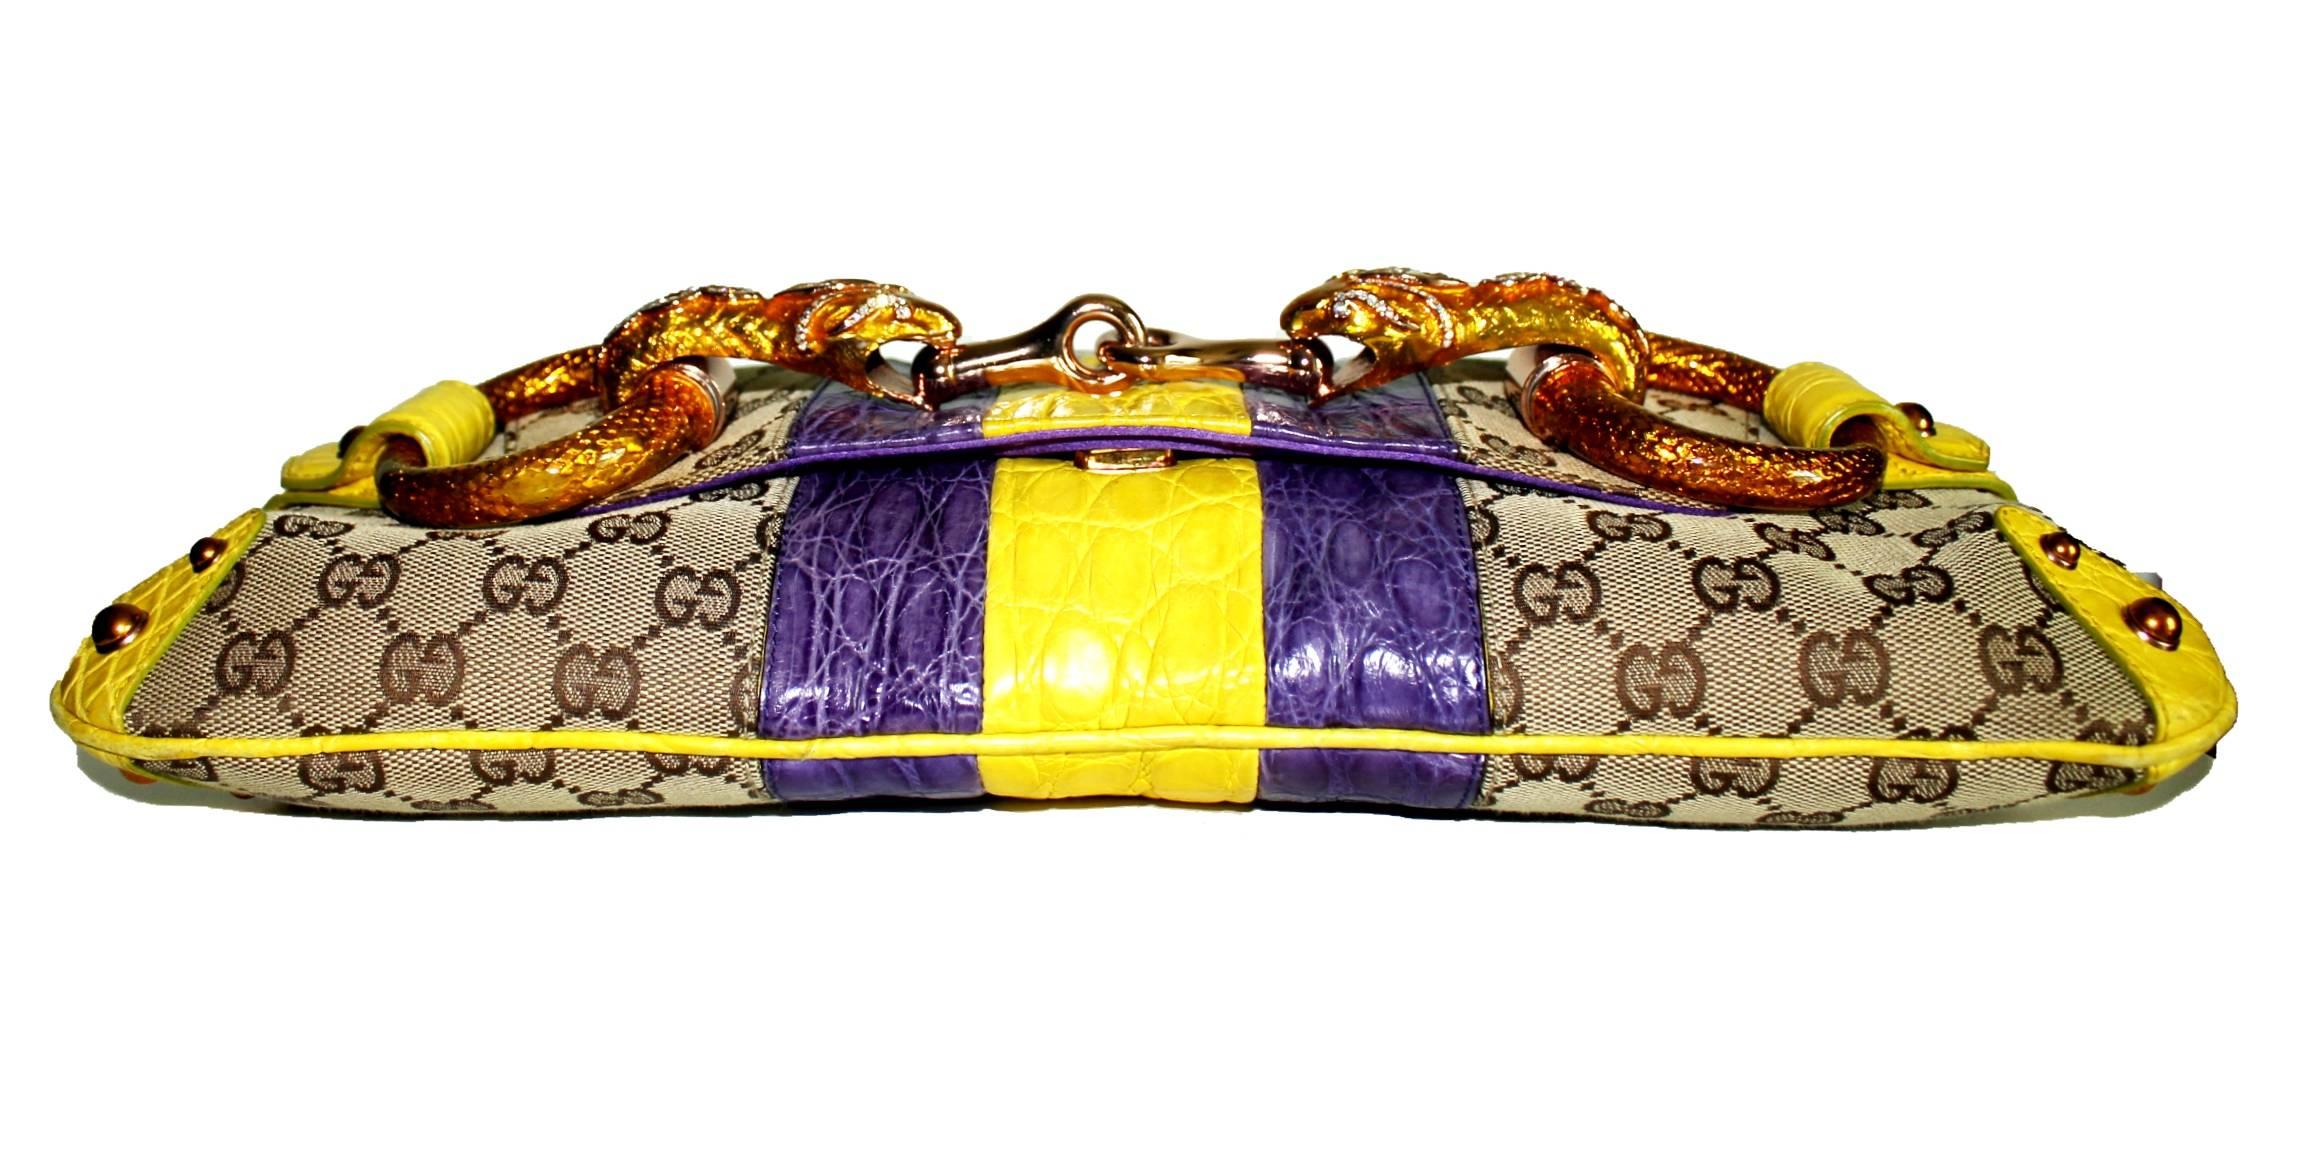 EXTREMELY RARE

GUCCI BY TOM FORD

GORGEOUS SNAKE HEAD JEWELLED GG MONOGRAM 

LIMITED EDITION 

DETAILS: 
A GUCCI signature piece that will last you for many years
From one of GUCCI's most stunning collections by Tom Ford
Very rare Collector's